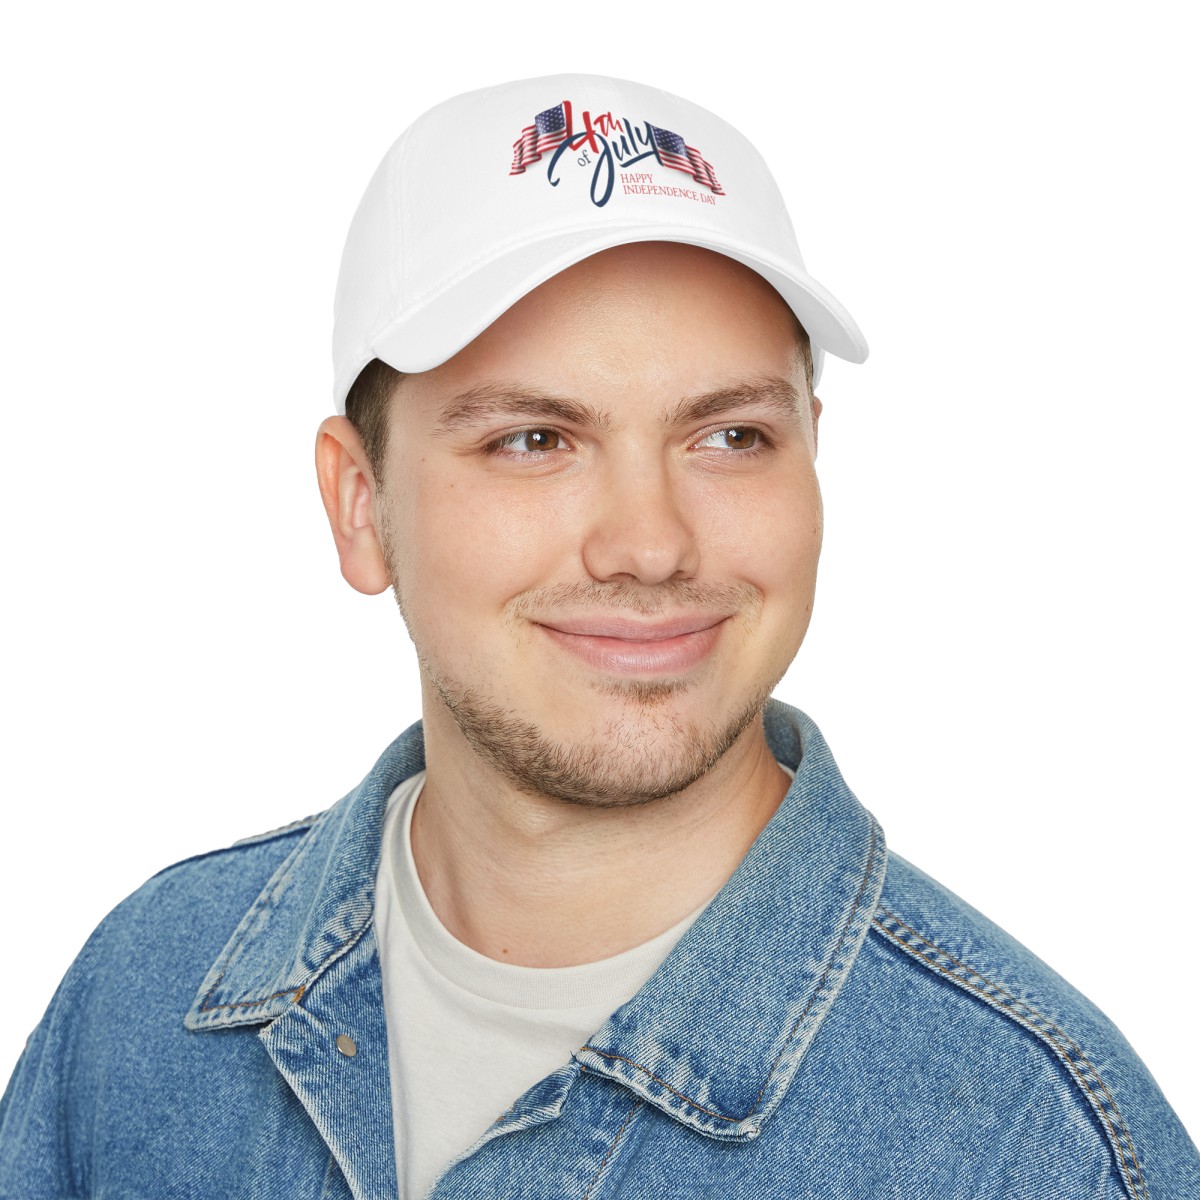 4th of July - Baseball Cap - Giftz for your loved ones